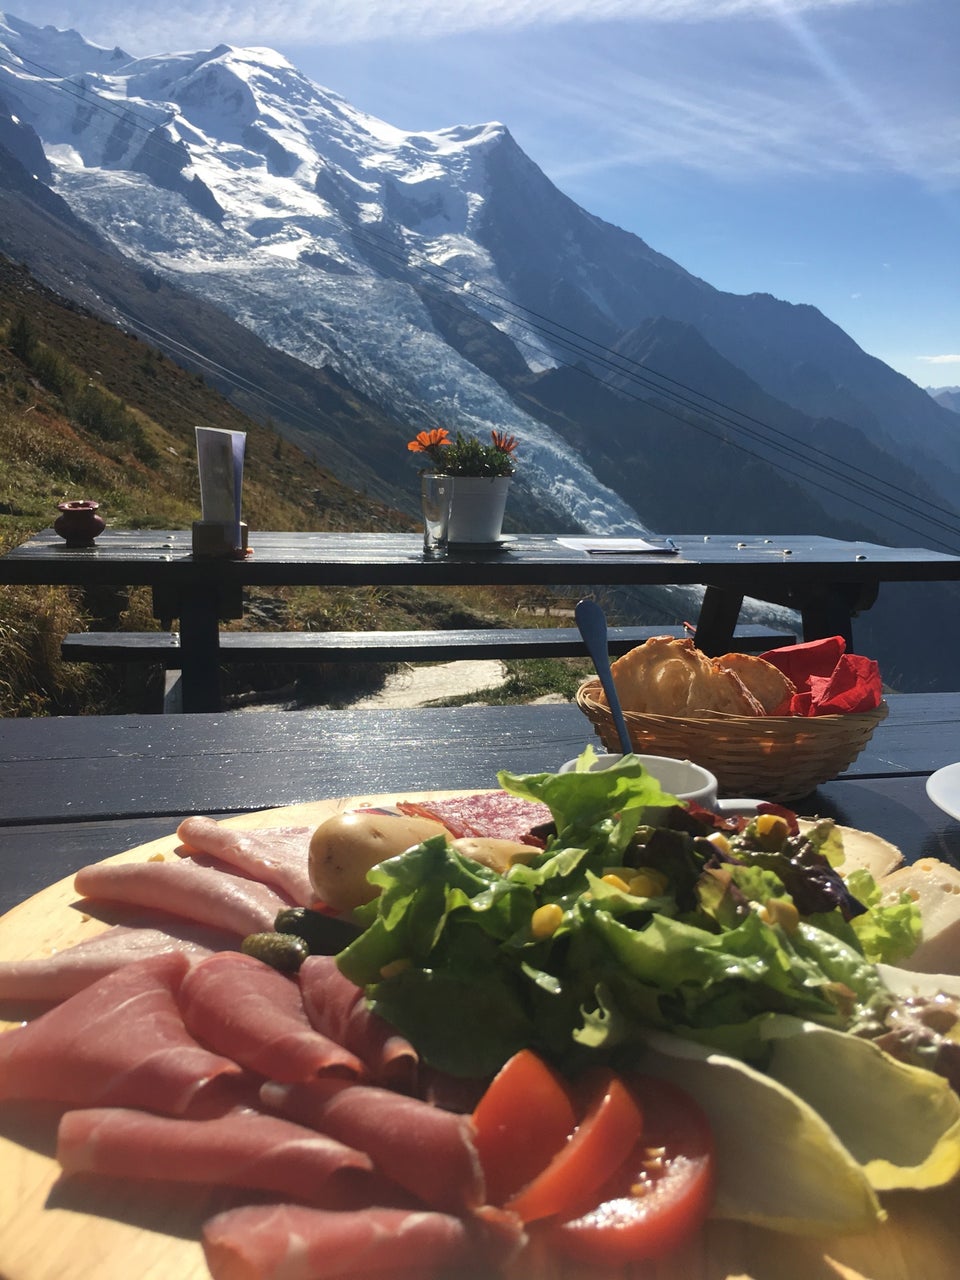 Refuge Plan de l'Aiguille- A plate with some cold cuts with a view. The Must-Read Guide to Chamonix.